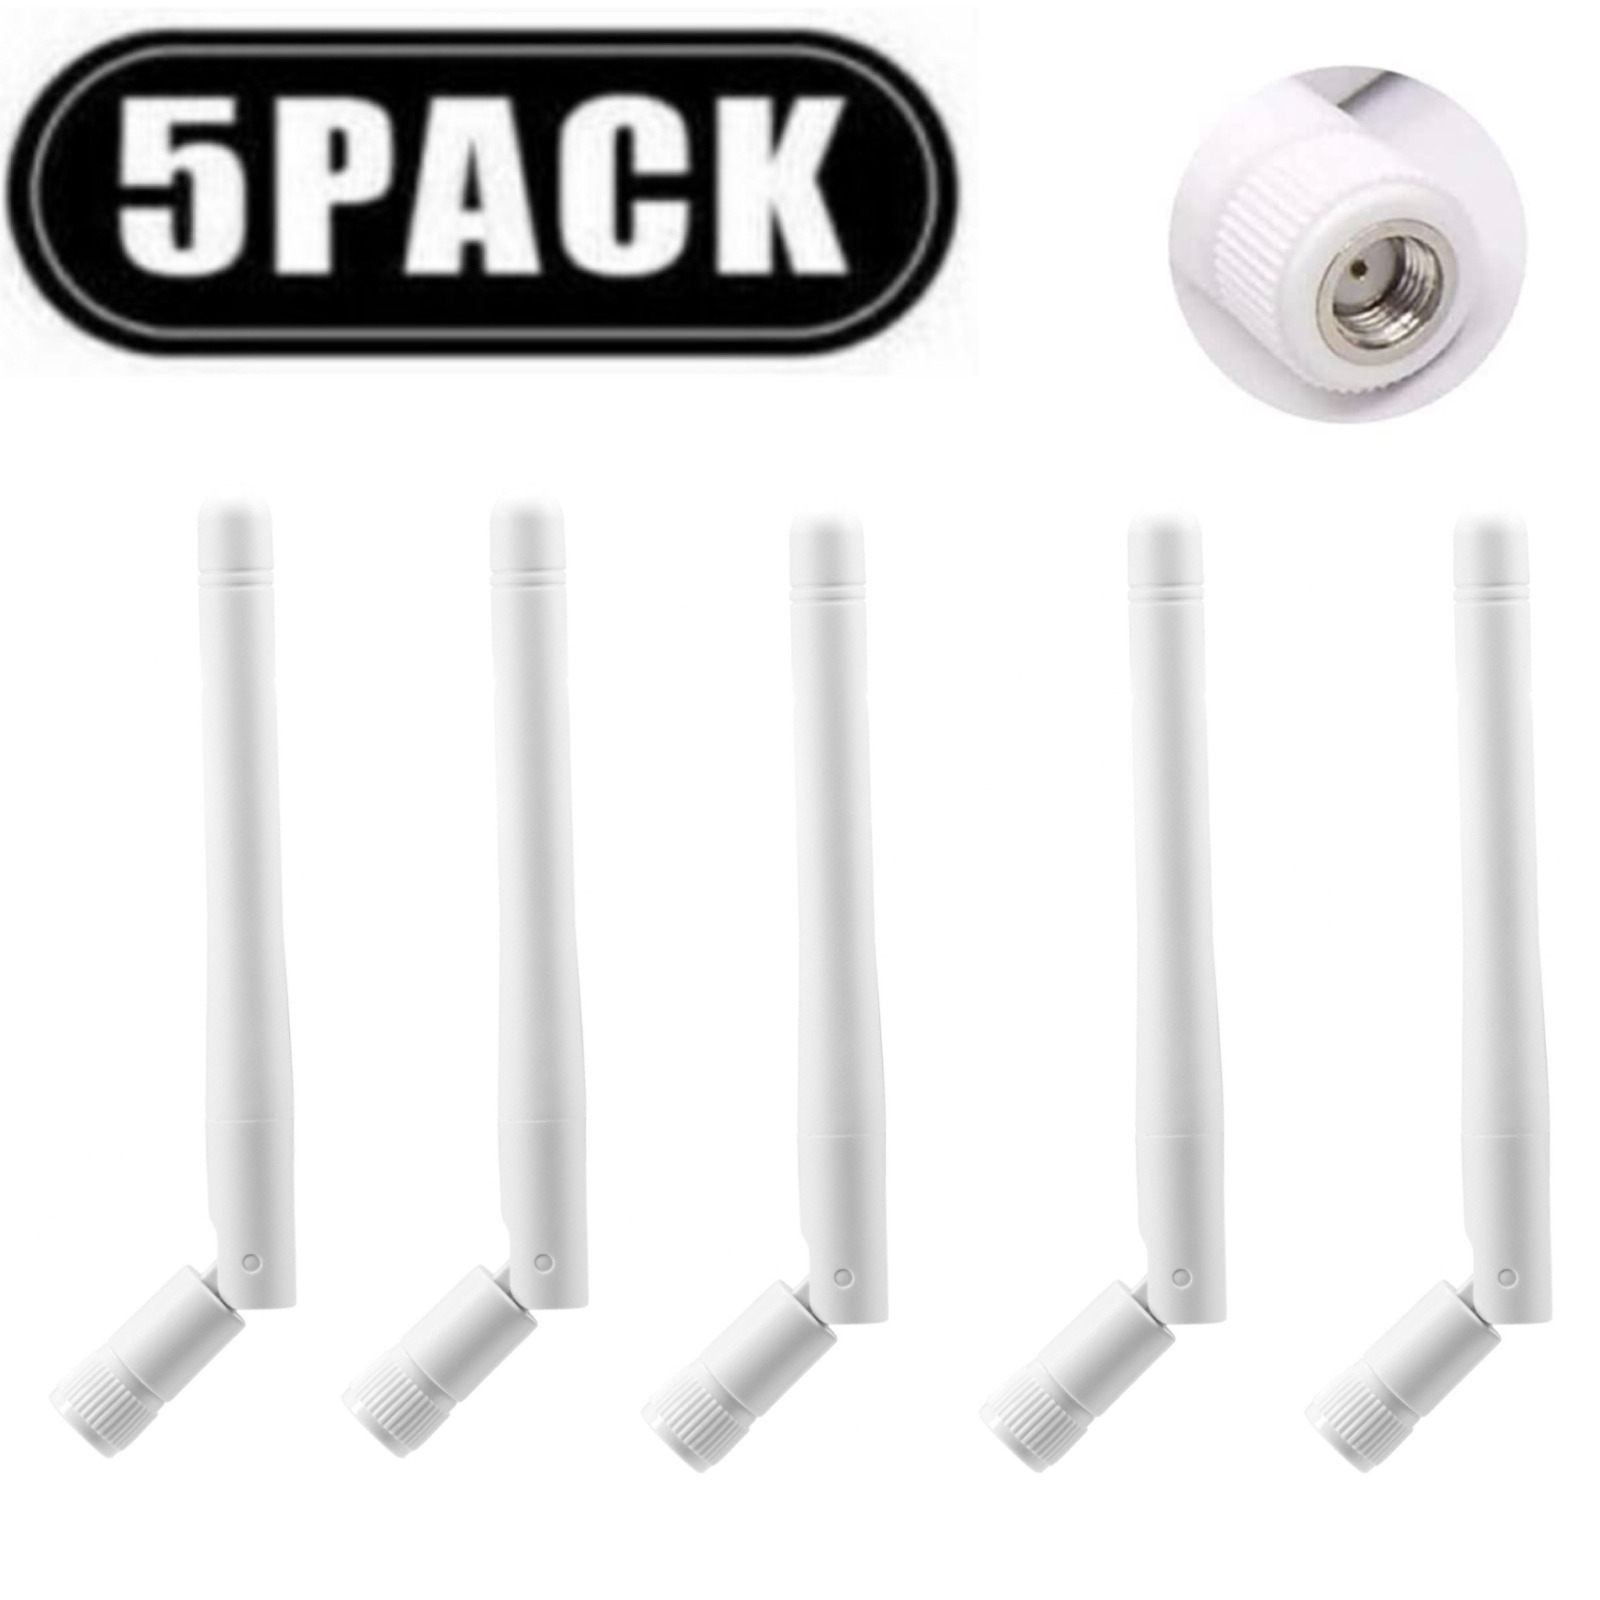 5-PACK LOT RP-SMA Antenna for WiFi 2.4GHz/5Ghz Wireless Router or Card (White)